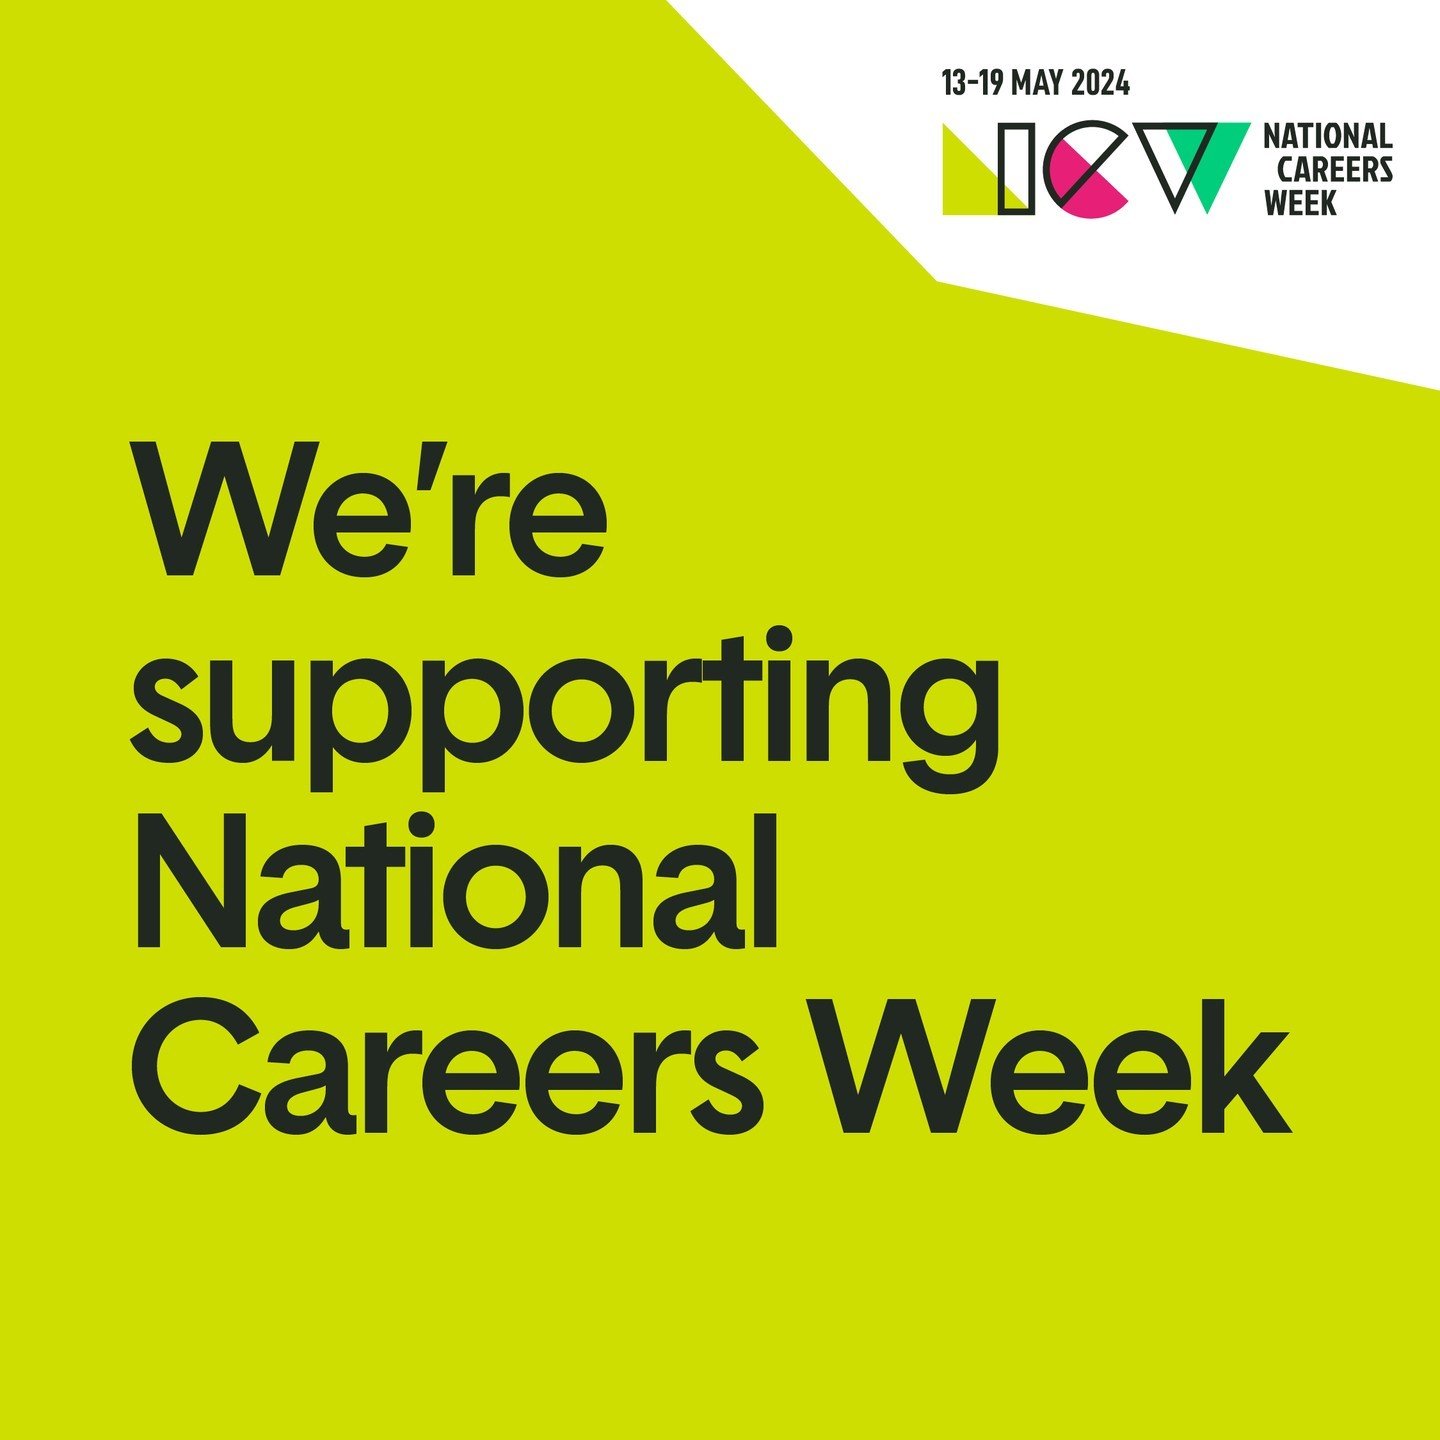 National Careers Week is coming - 13-19 May 2024! ⚡ 🚀
The #ncwau24 website has info &amp; resources to help you plan your activities or find an event to attend.

Whether you're hosting, exploring career options or providing professional guidance, yo